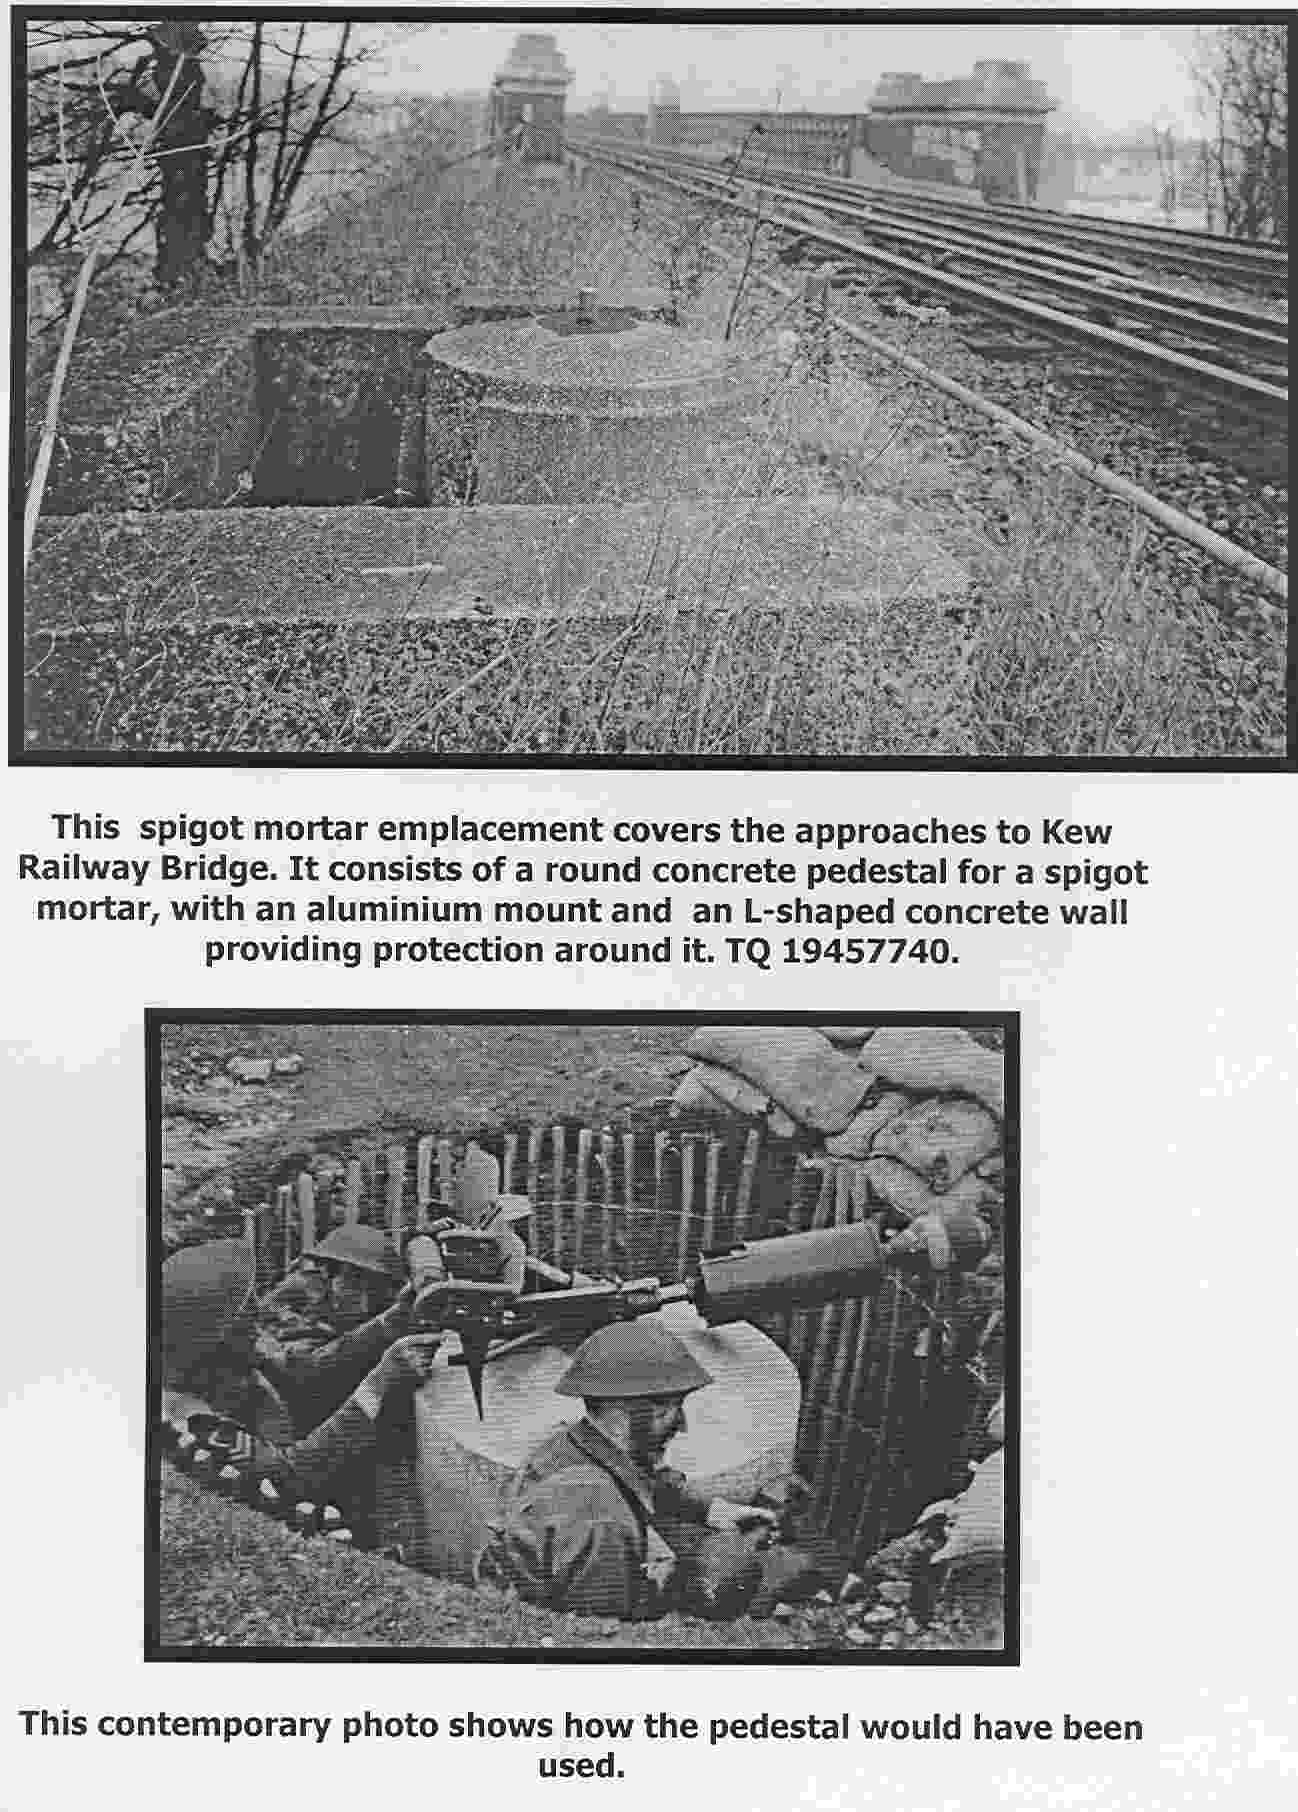 Pillboxes - Images of an Unfought Battle - sample page - actual book images are much better quality